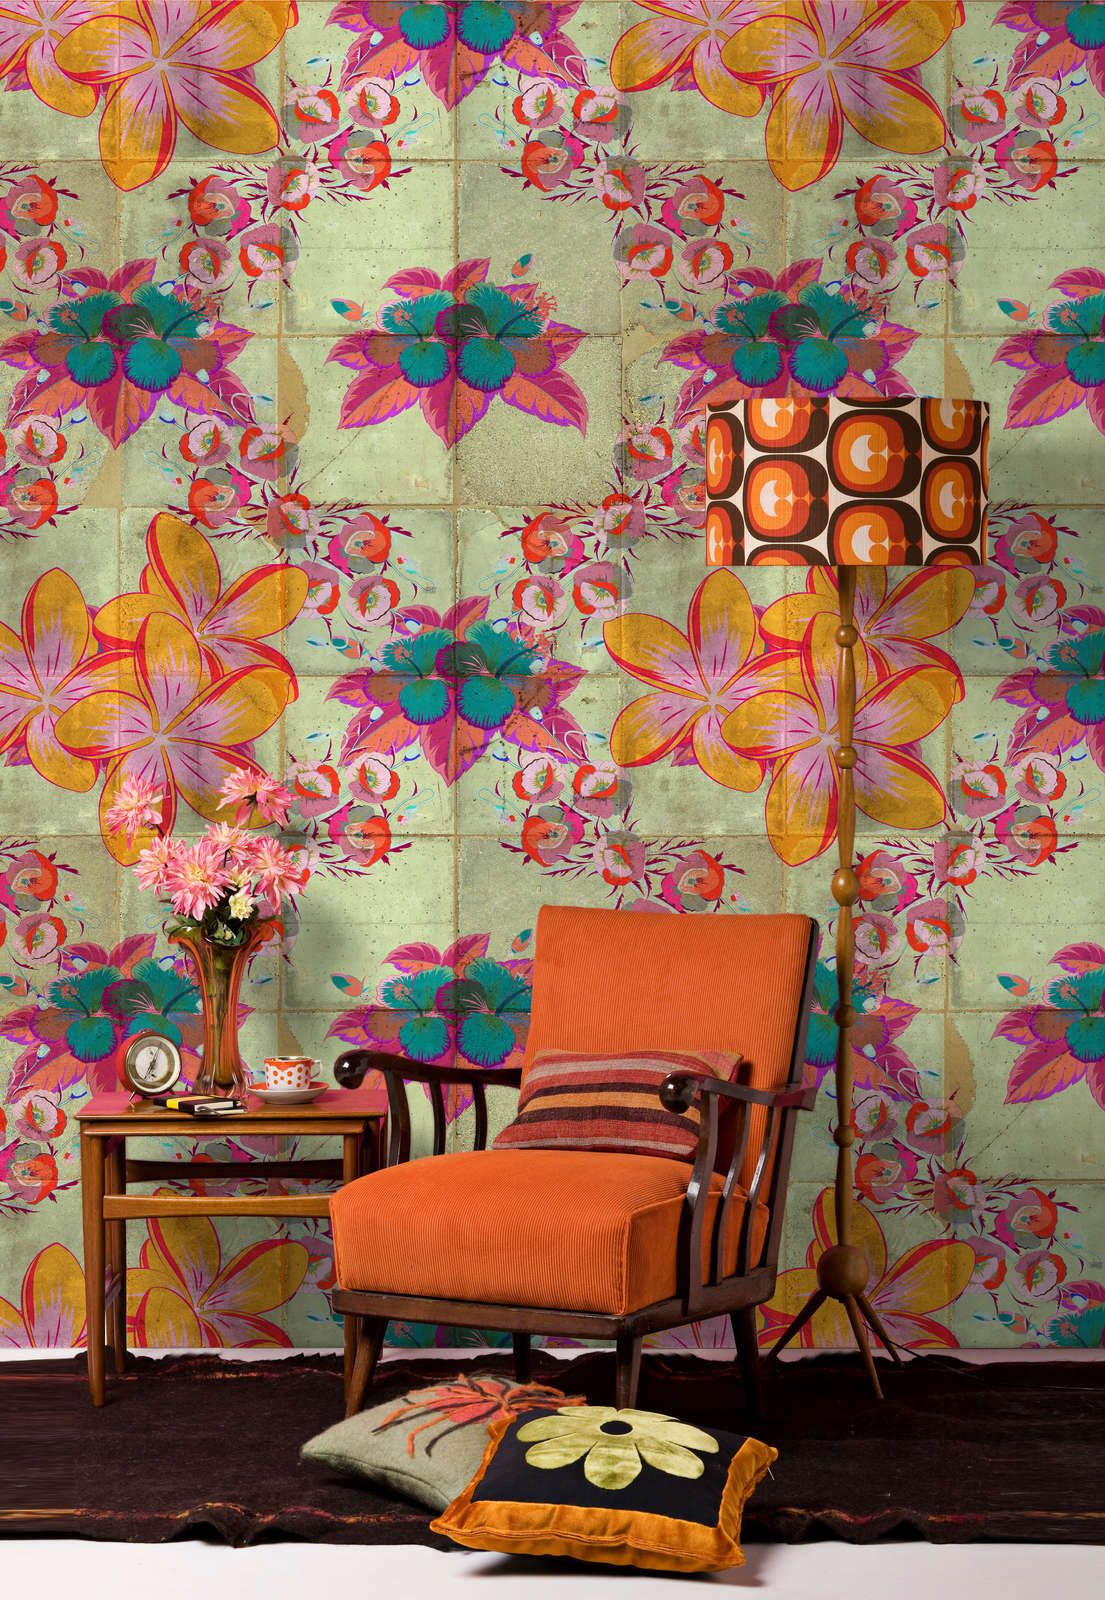             Photo wallpaper »jolie« - Floral design with kaleidoscope effect on concrete tile structure - Smooth, slightly shiny premium non-woven fabric
        